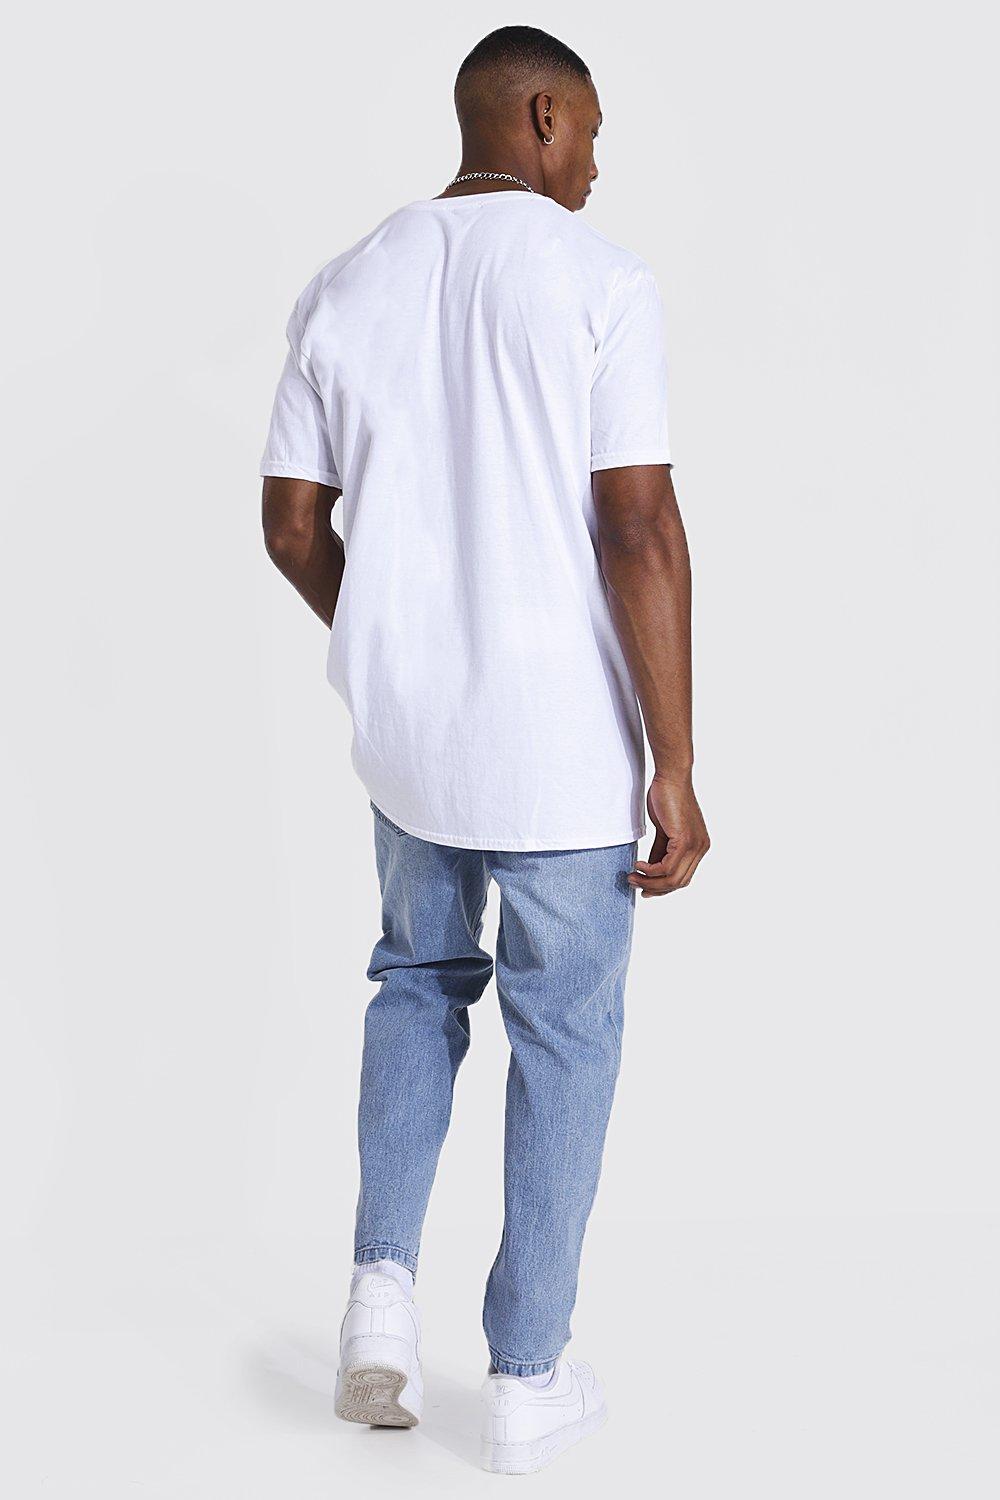 Tapered Fit Rigid Jeans